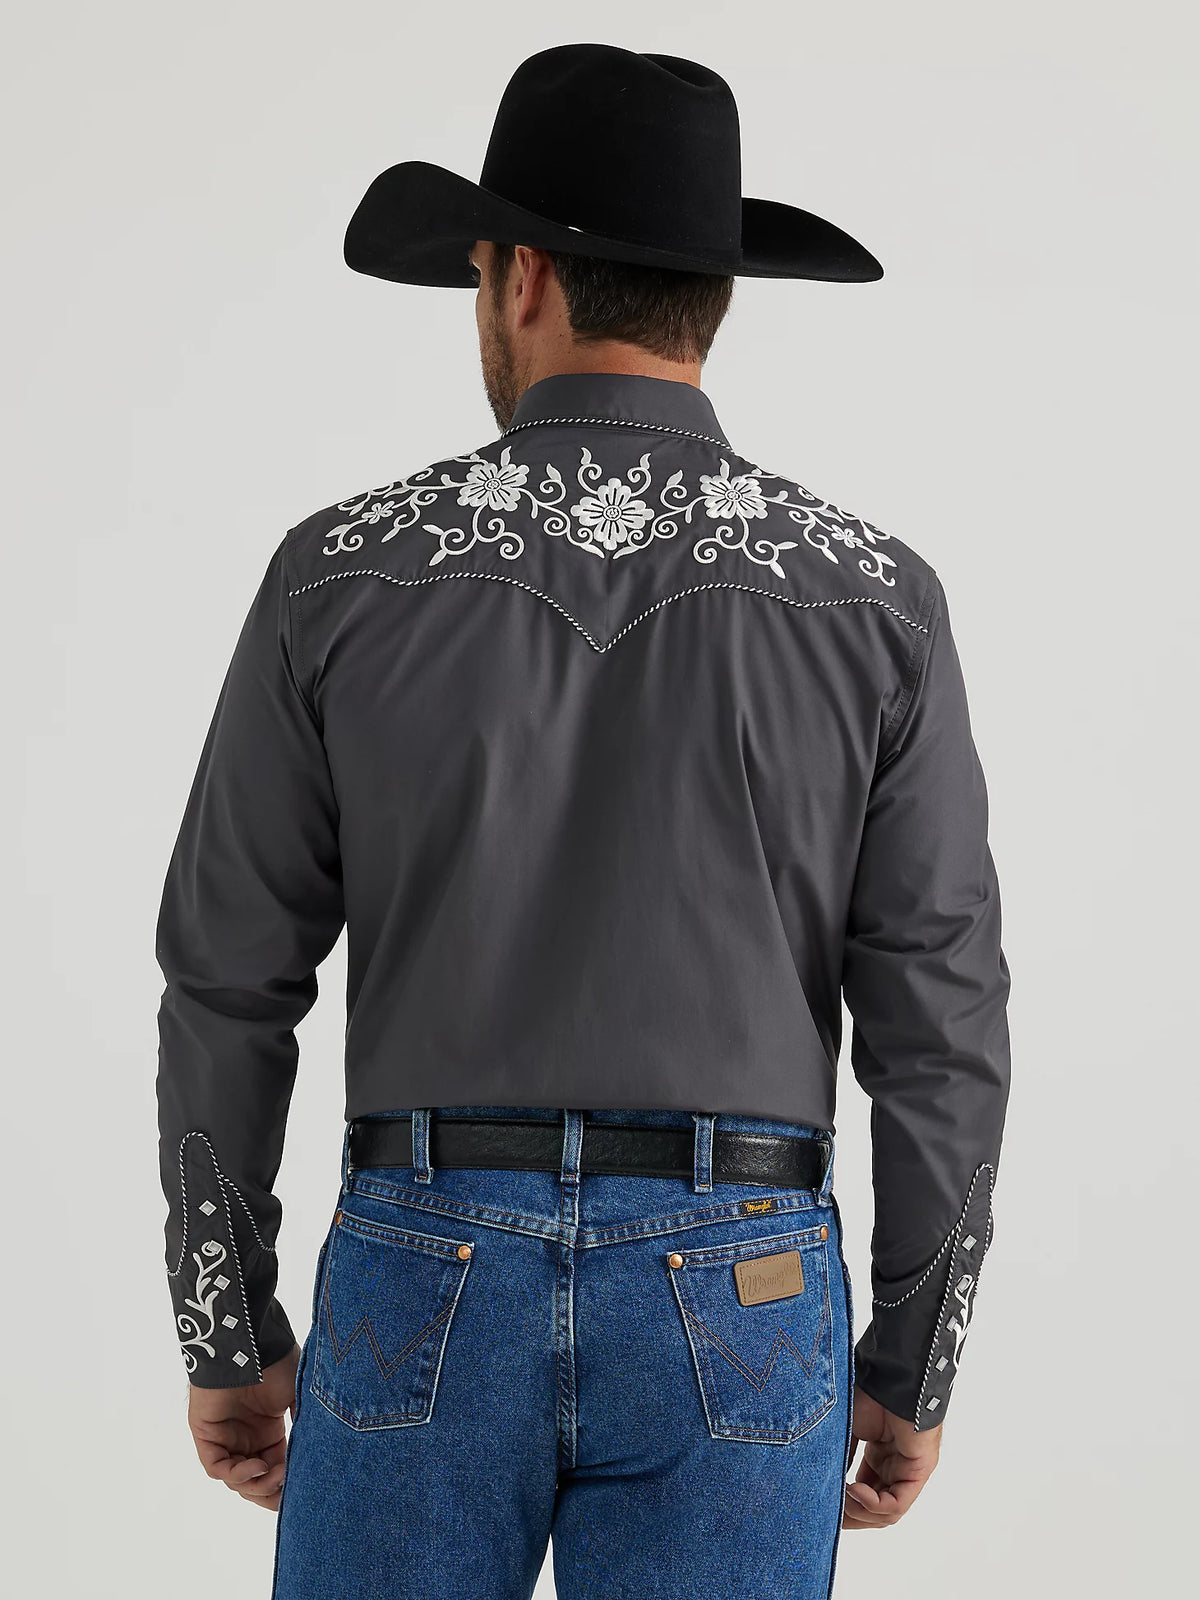 Wrangler Men's Rodeo Ben Long Sleeve Western Snap Shirt in Embroidered Grey